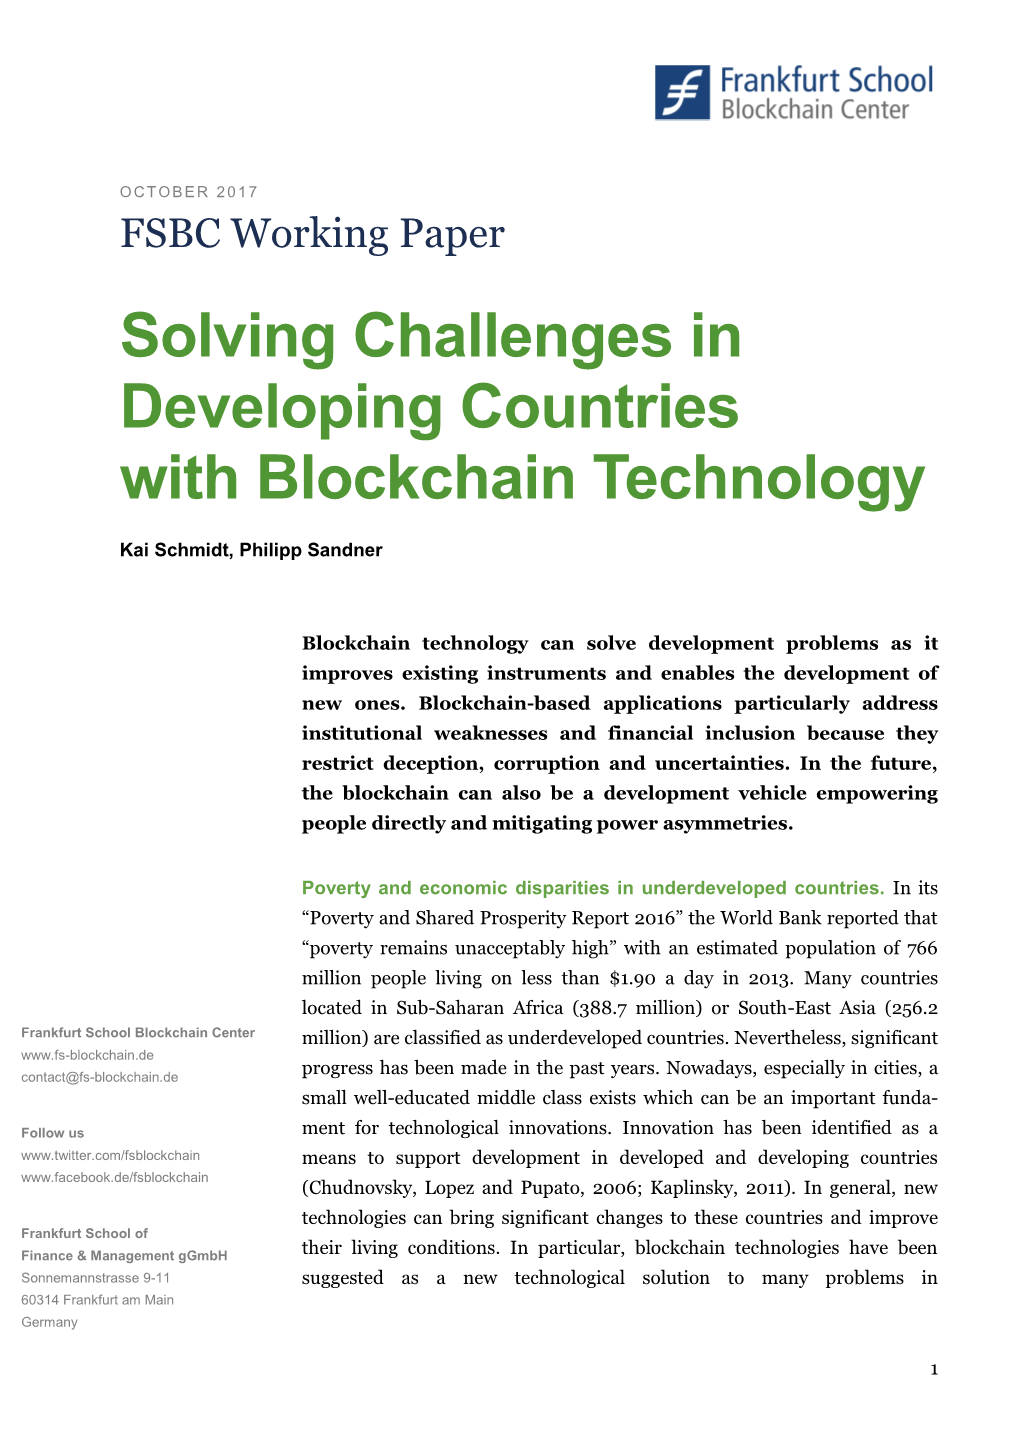 Solving Challenges in Developing Countries with Blockchain Technology